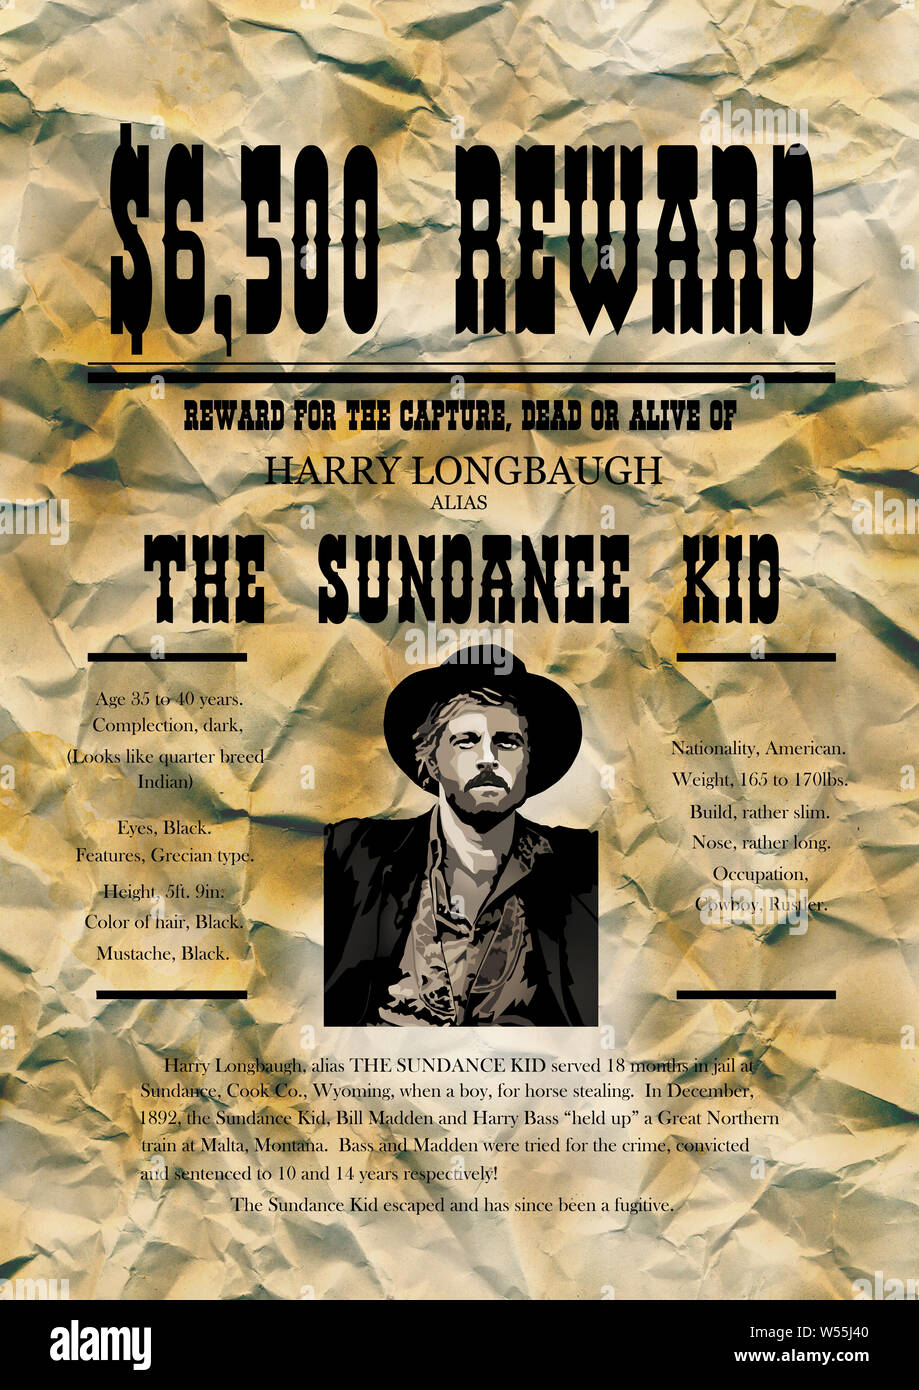 The Sundance Kid Wanted Poster. Stock Photo